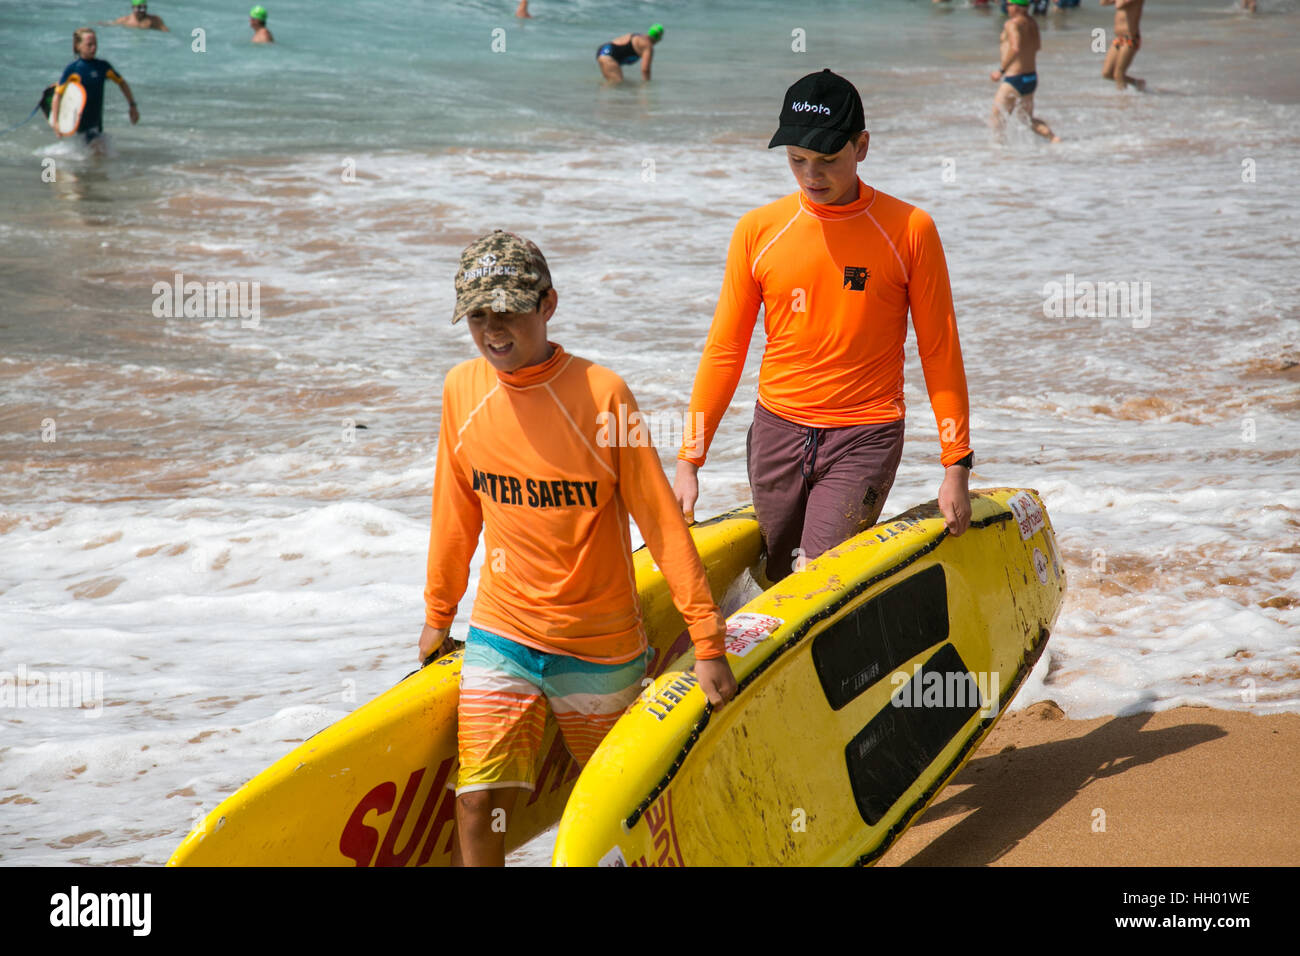 Sydney, Australia. 15th January 2017. Sunday 15th January 2017. Avalon Beach Annual  Ocean Swim is the third stage in the Pittwater Ocean Swim Series, and consists of a 1km event and a 1.5km course. Surf Rescue staff, body masseurs and first aid personnel were on hand in Sydney, Australia. These two boys are carrying surfboards to the adult lifesavers on the beach. Credit: model10/Alamy Live News Stock Photo